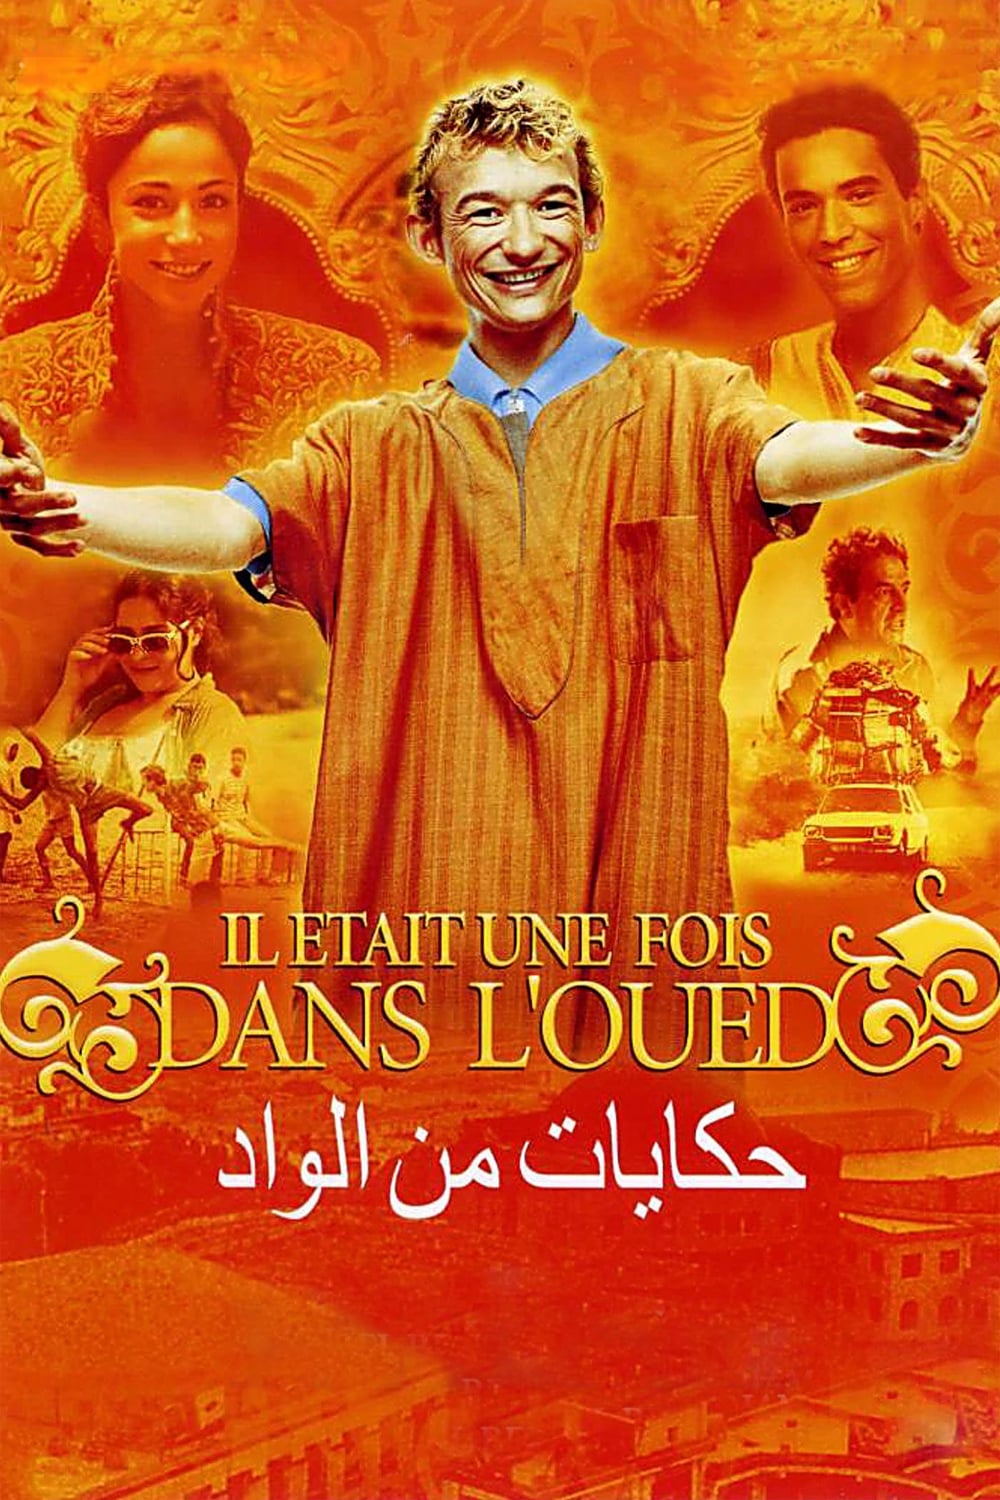 Once Upon a Time in the Oued (2005)